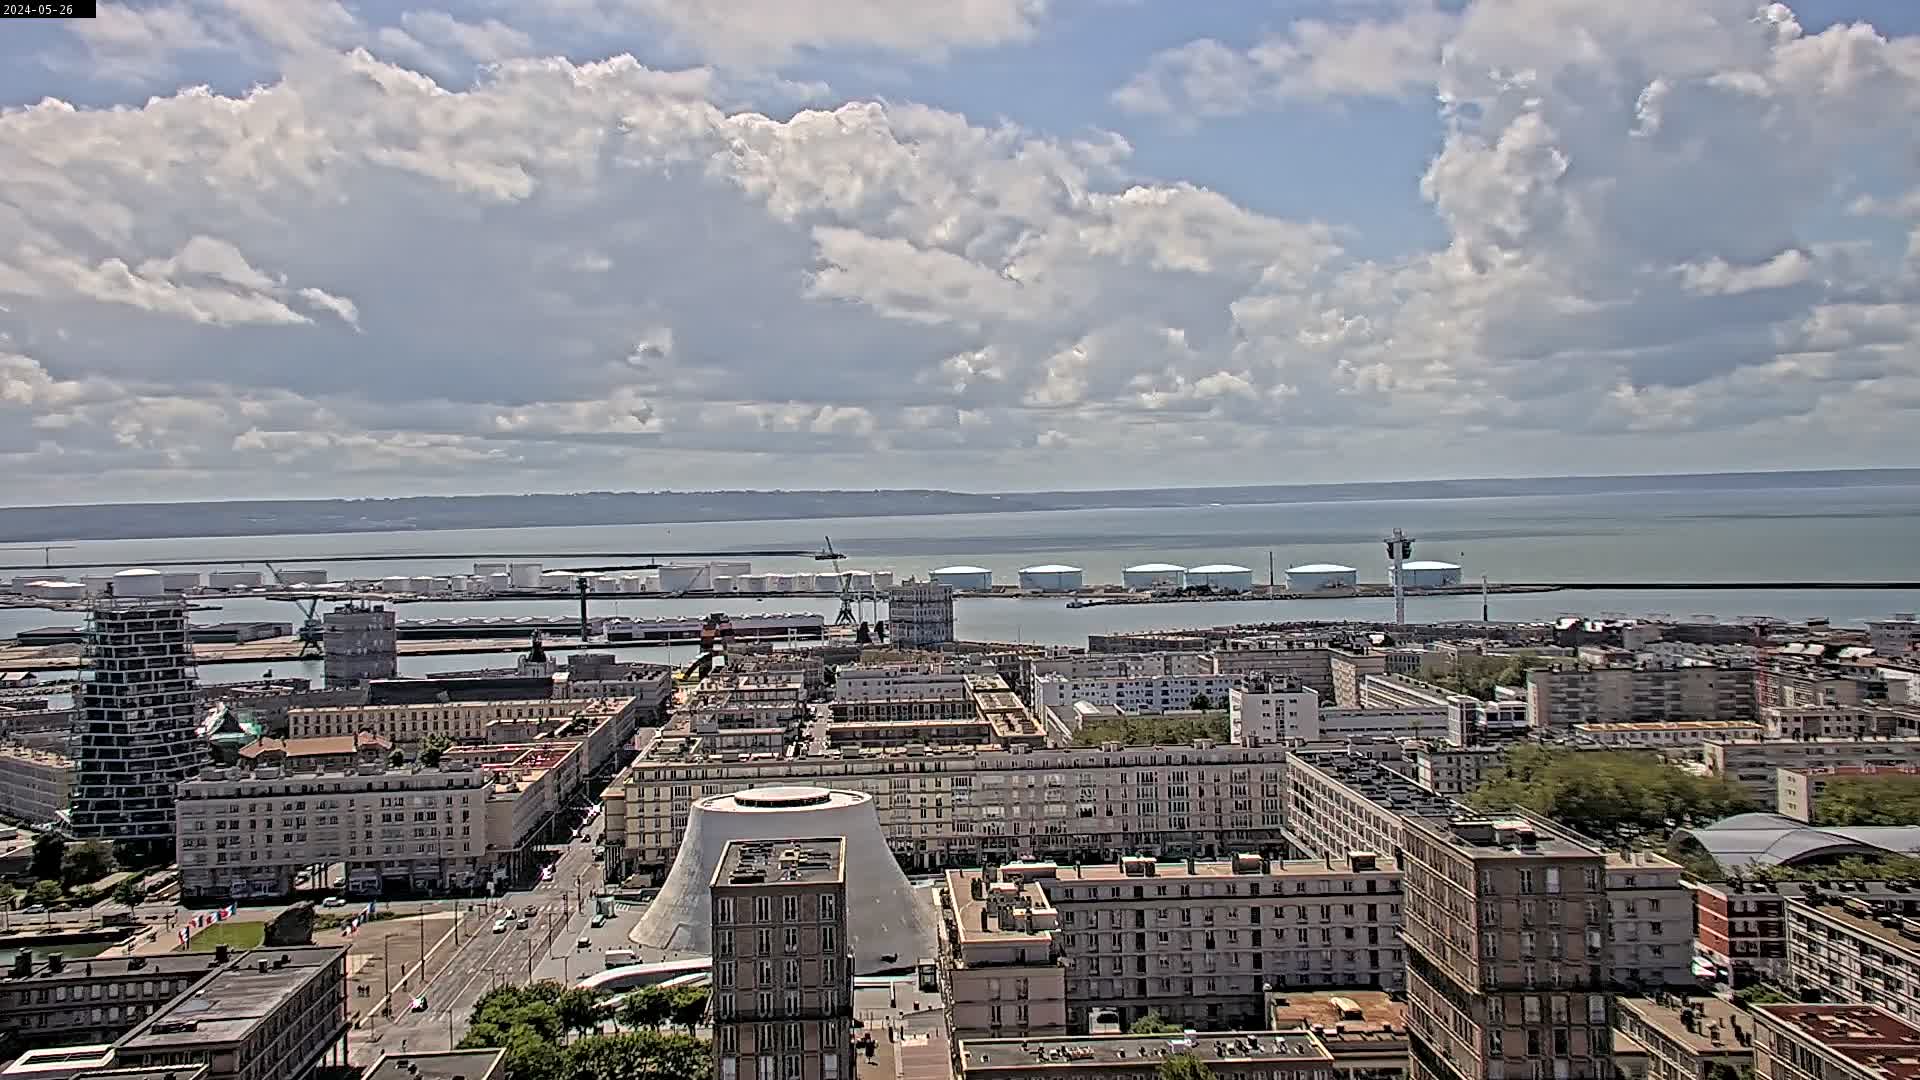 Le Havre Gio. 13:10